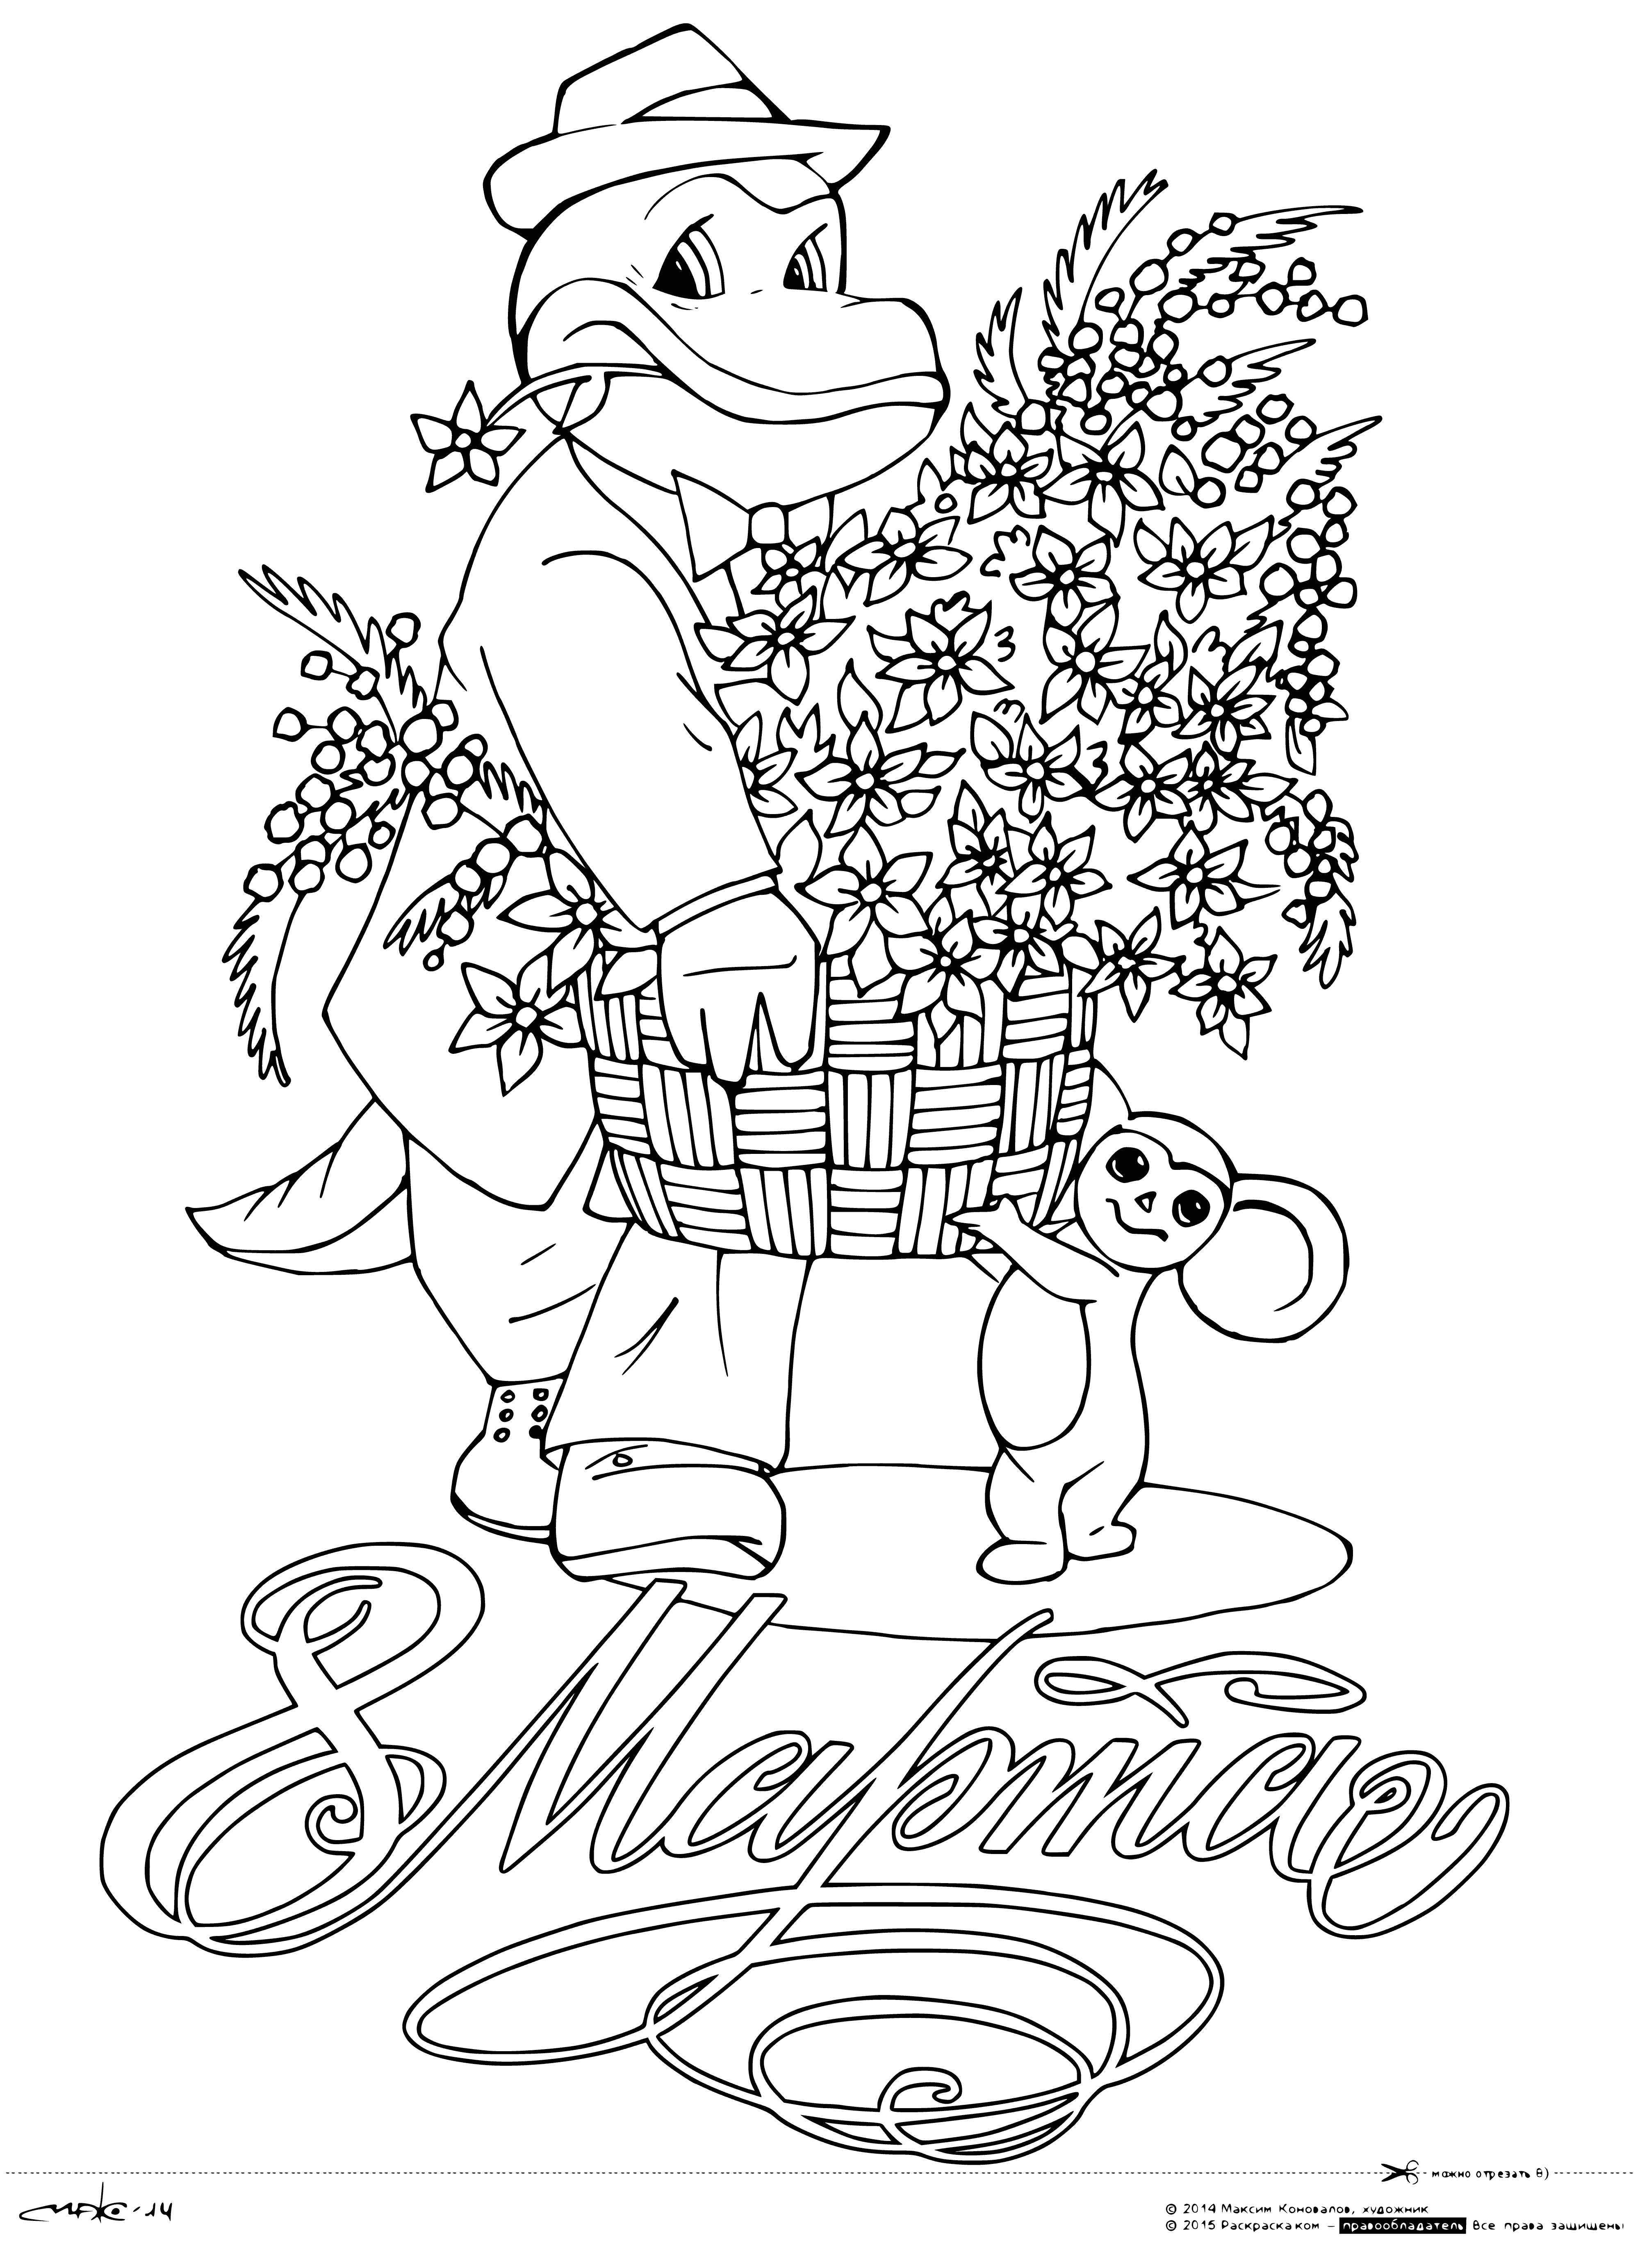 coloring page: Gena holds a basket of flowers, Cheburashka smiles up at him. They stand happy together. #friendship